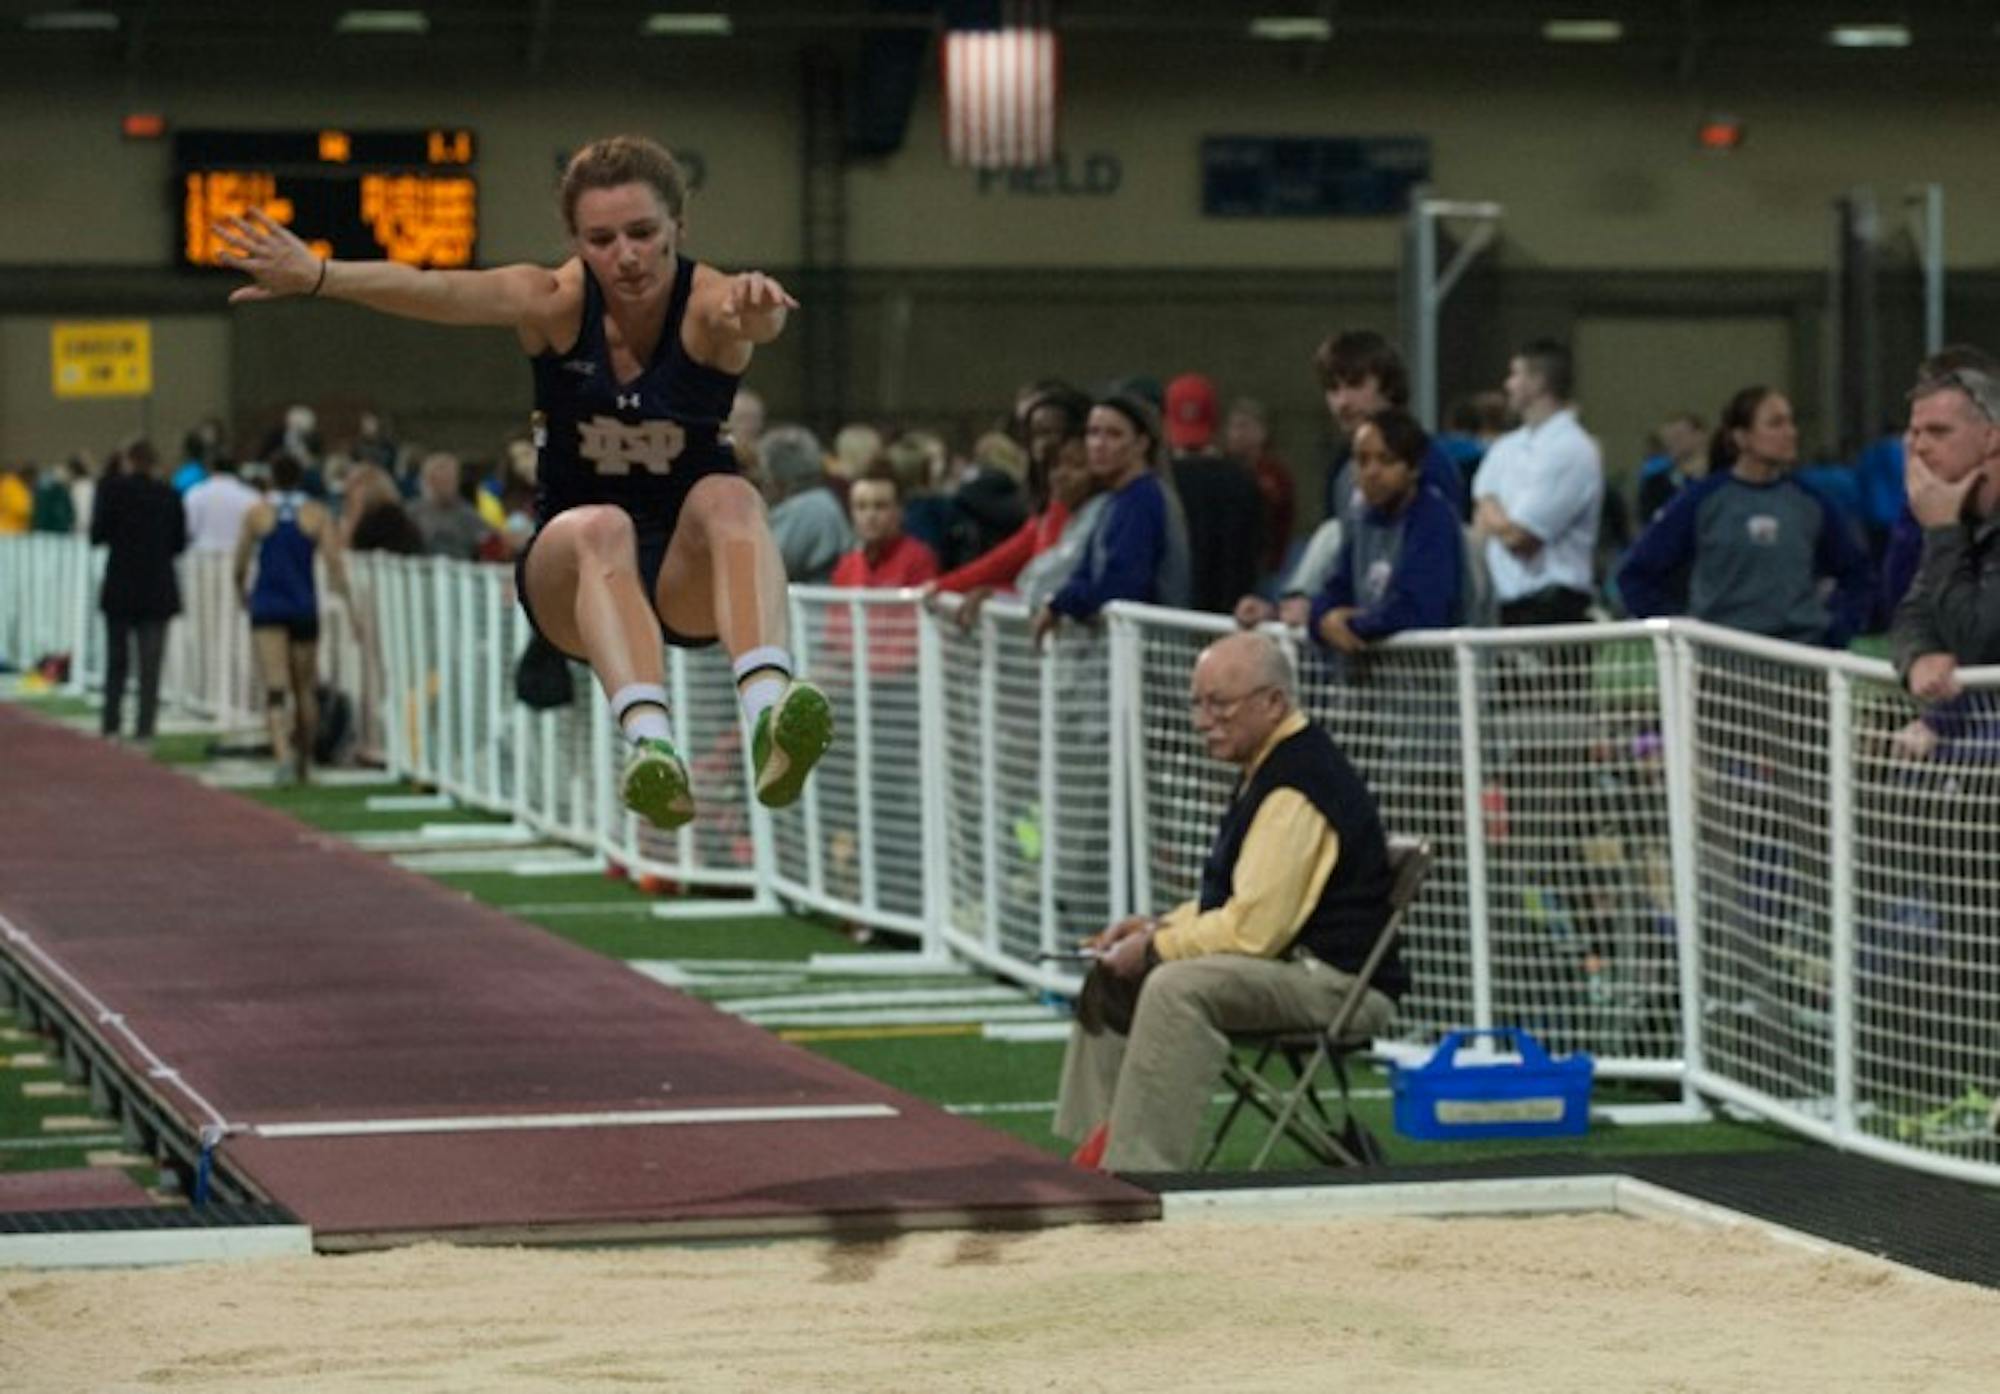 Junior long jumper Emily Carson competes during last year’s Meyo Invitational on Feb. 6, 2015 at the  Loftus Sports Center. The Irish will host this year’s edition of the Meyo Invitational this weekend.